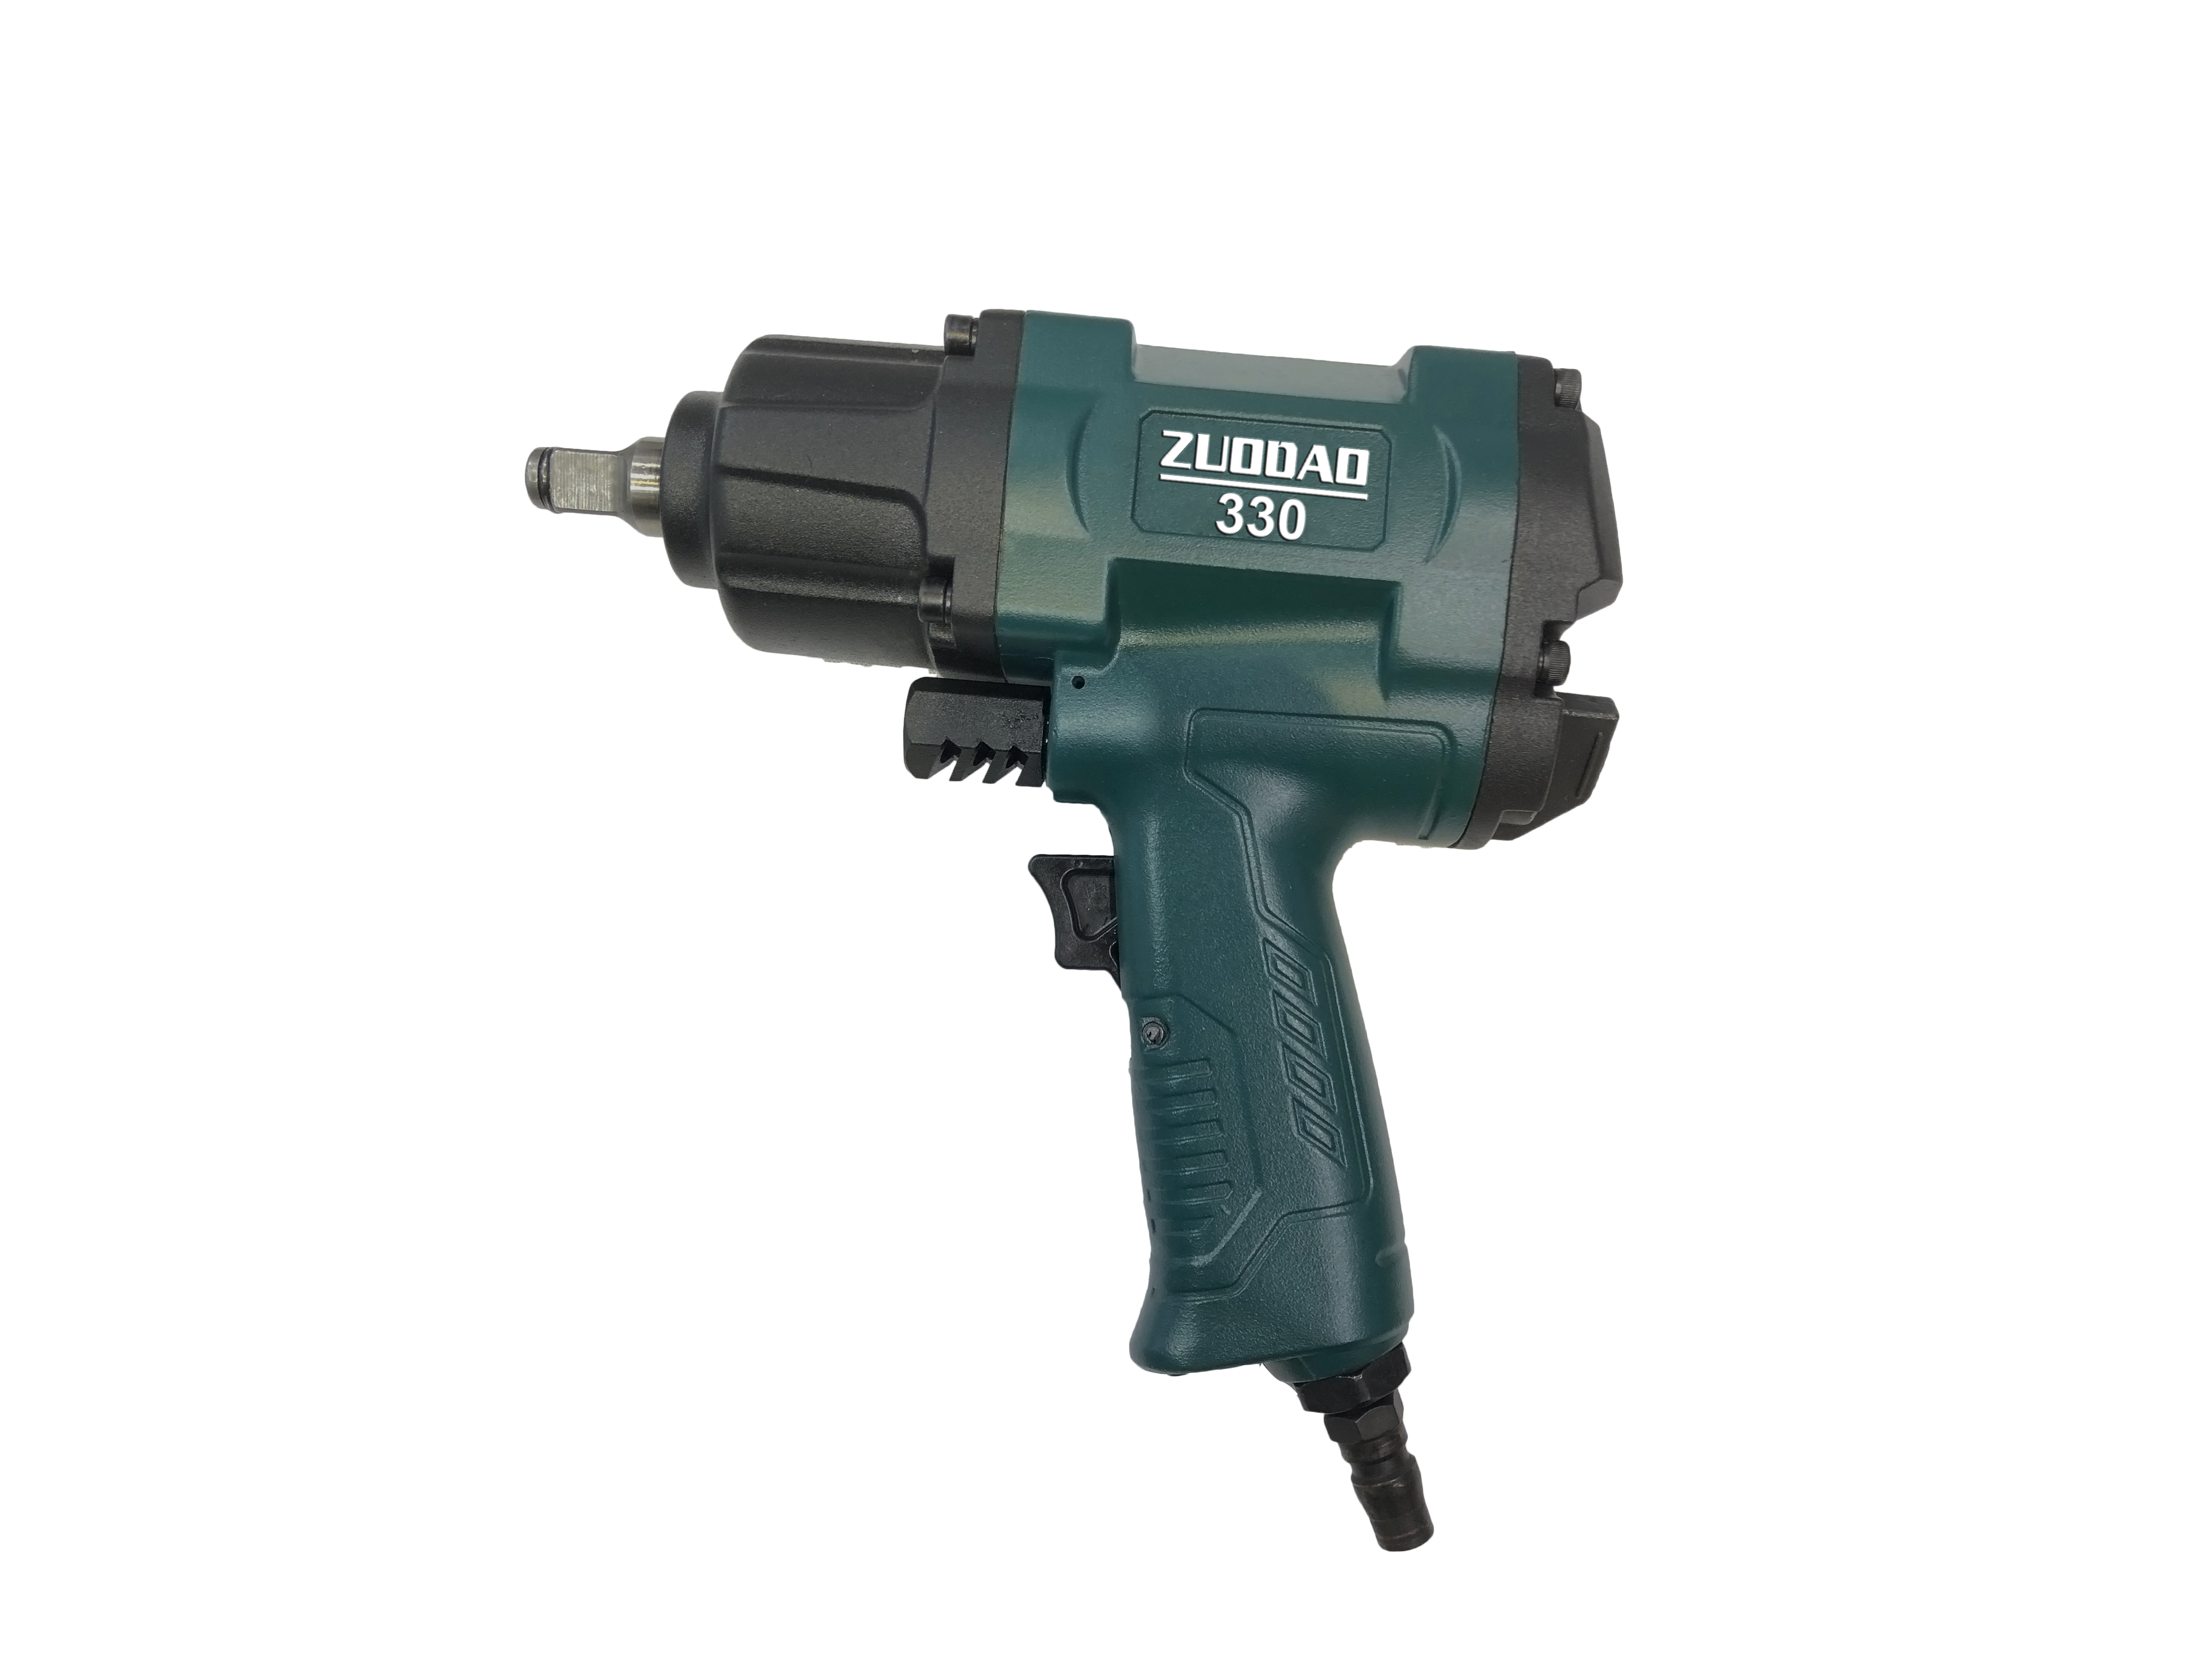 What is an air impact wrench used for? And how does it work?